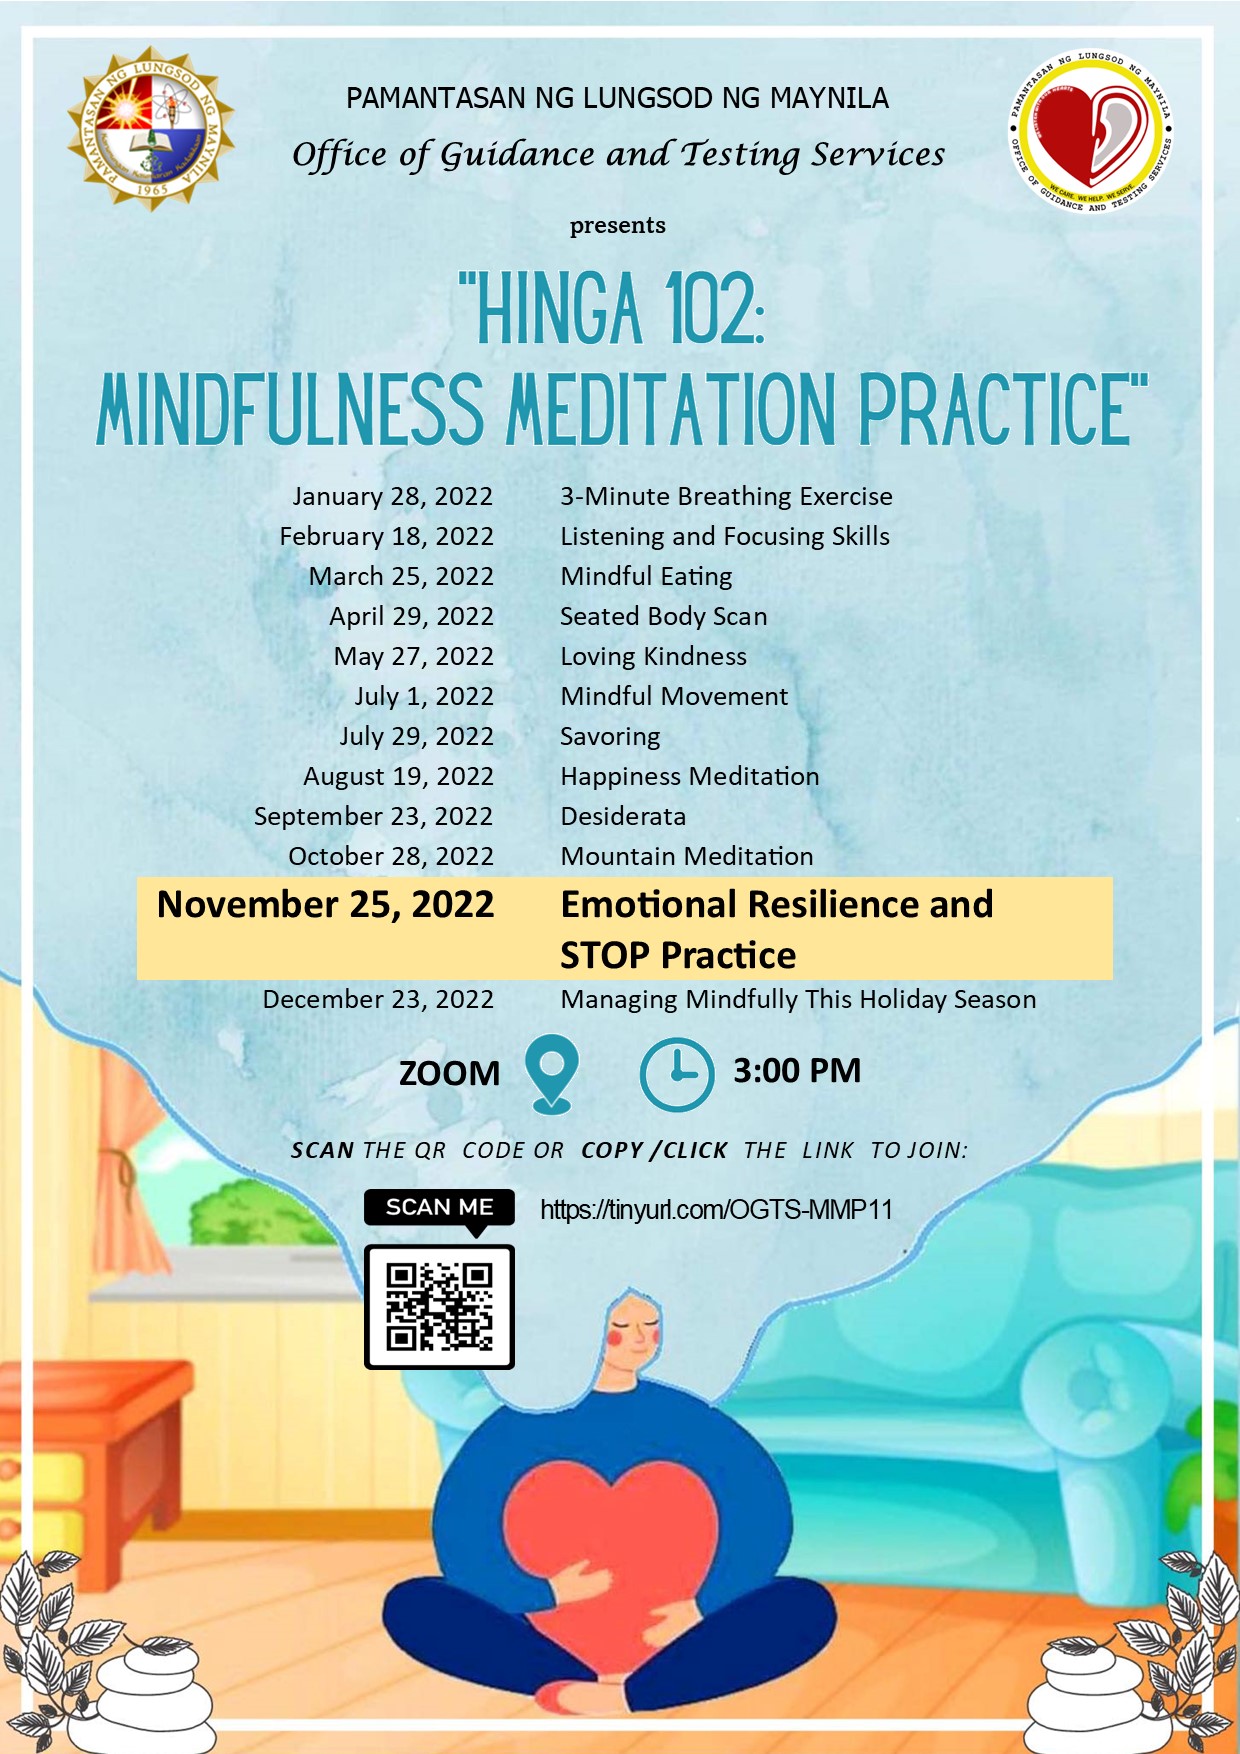 Join Hinga 102's Emotional Resilience and STOP Practice, November 25, 3:00PM